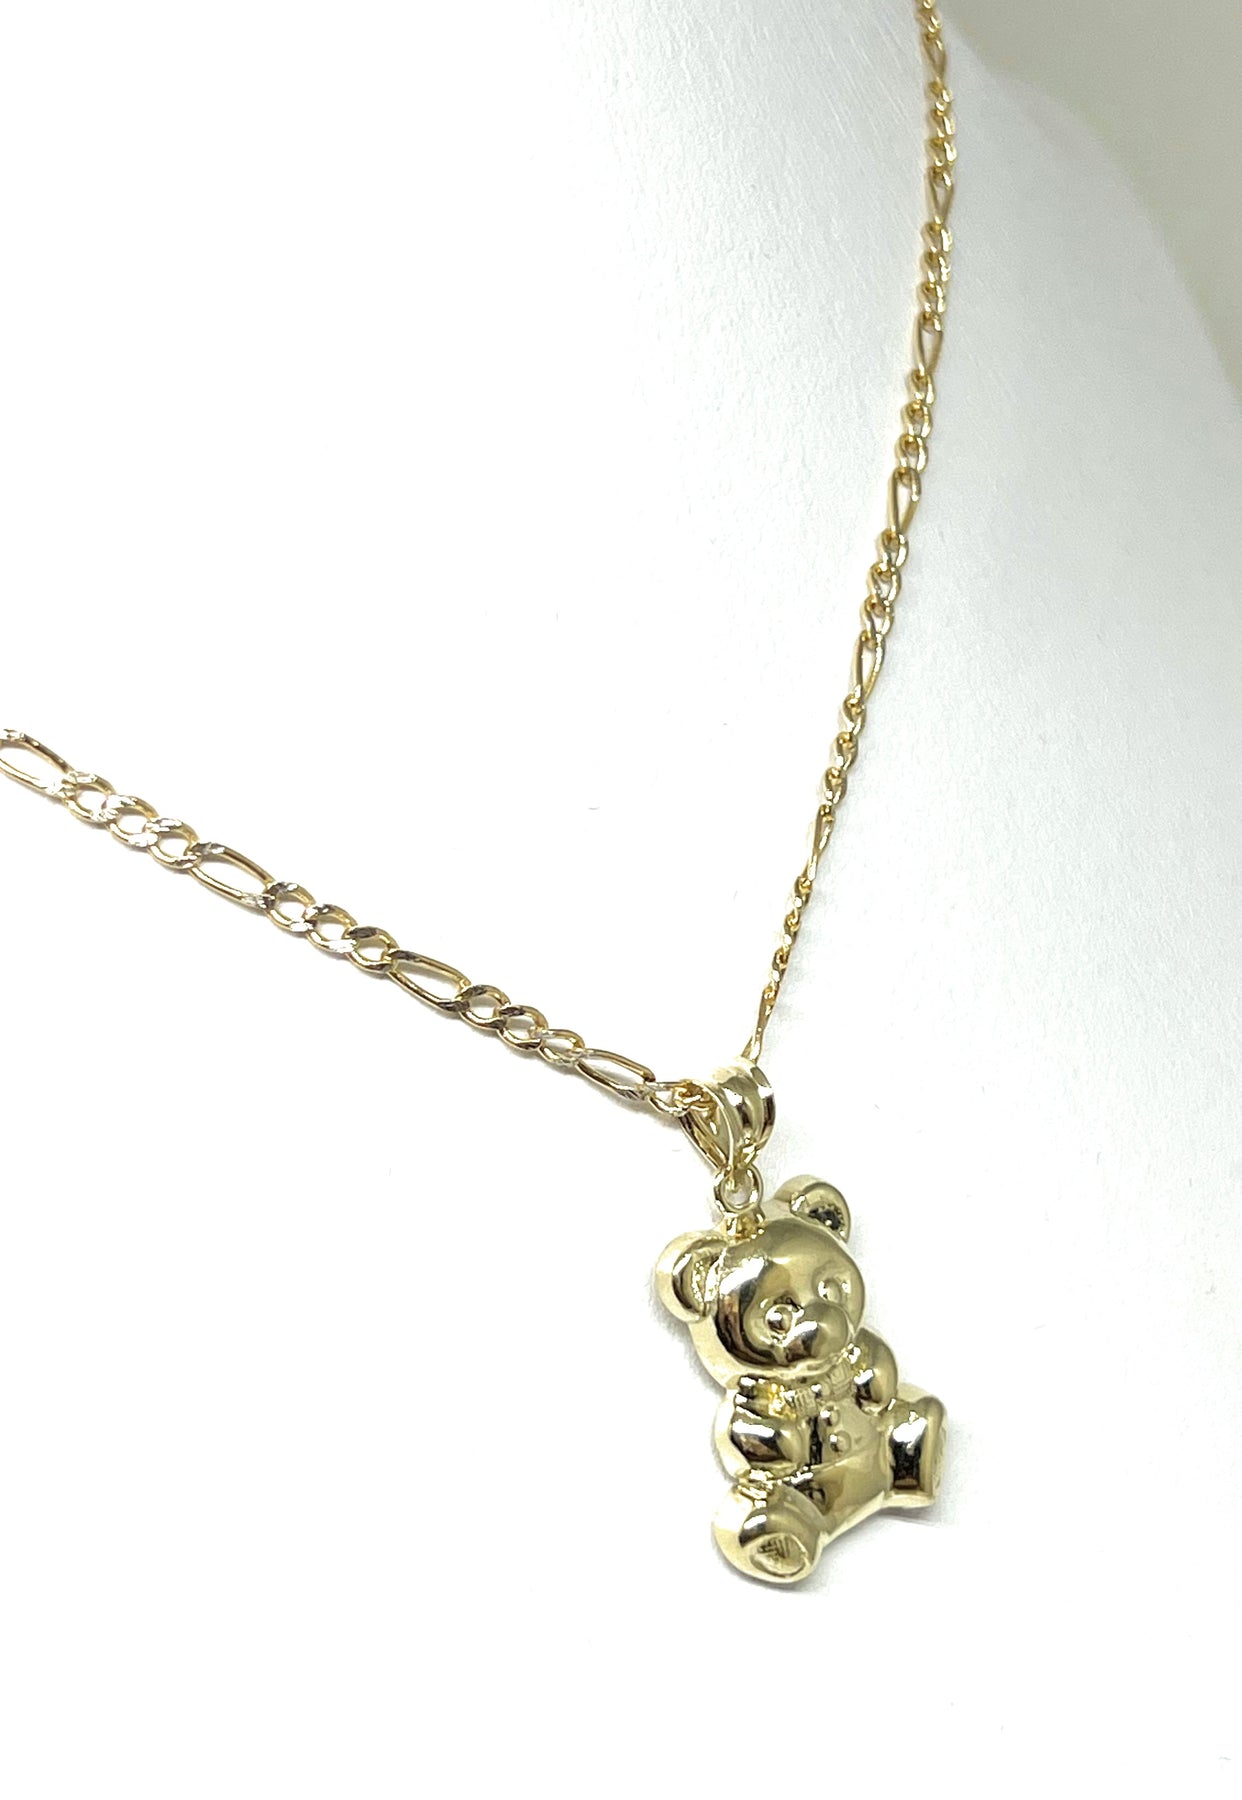 Solid Gold Teddy Bear Pendant – Fran & Co Jewelry